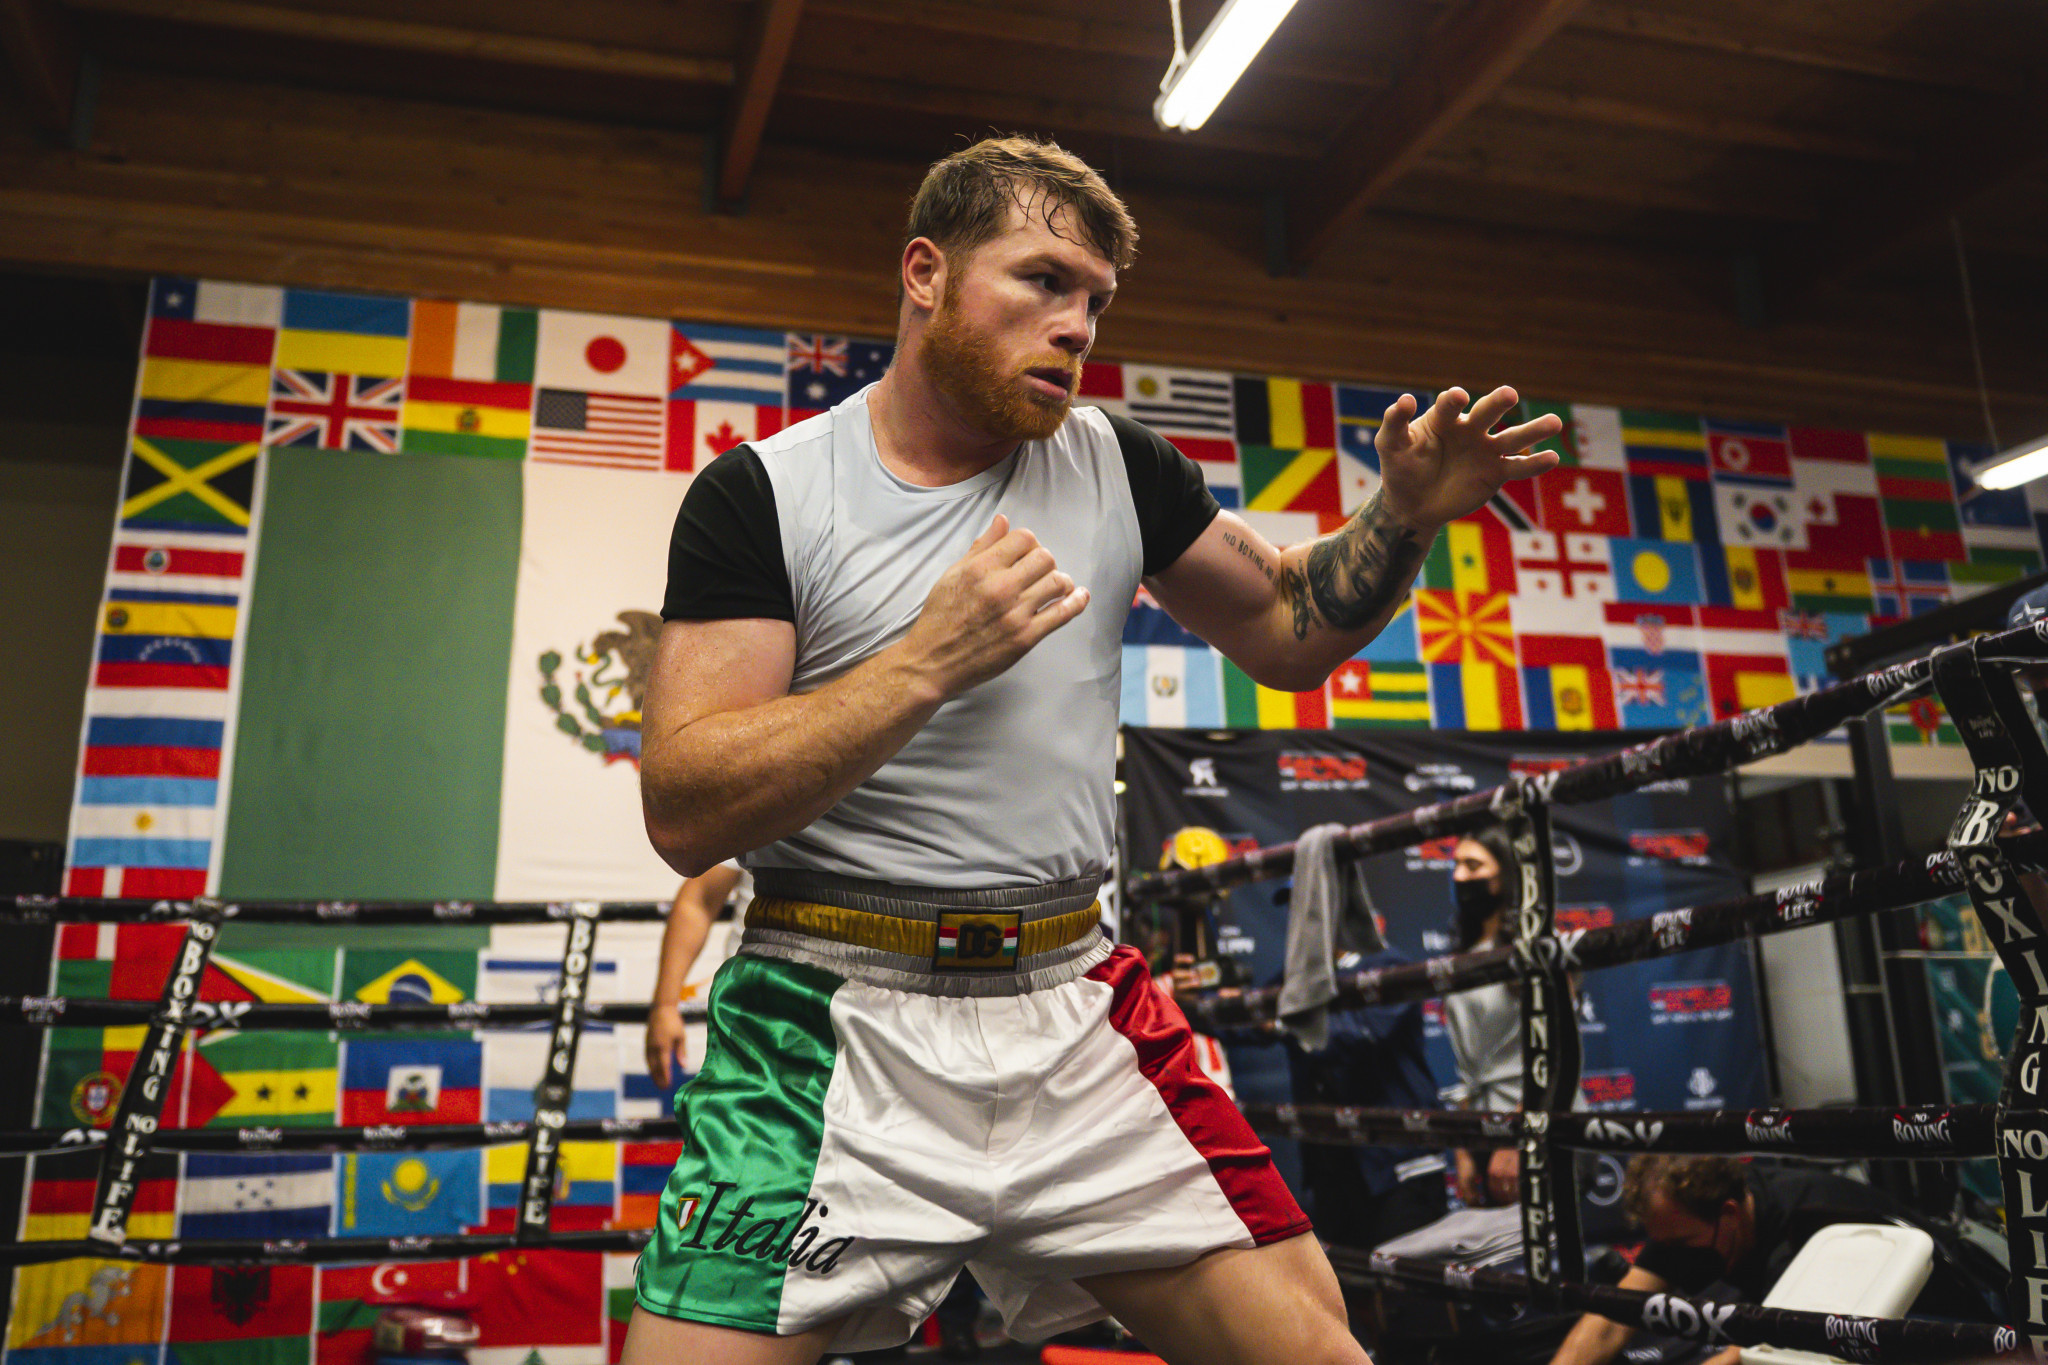 Canelo Álvarez is the regarded as the pound-for-pound greatest boxer in the world, though his record is tarnished by his drugs history ©Getty Images